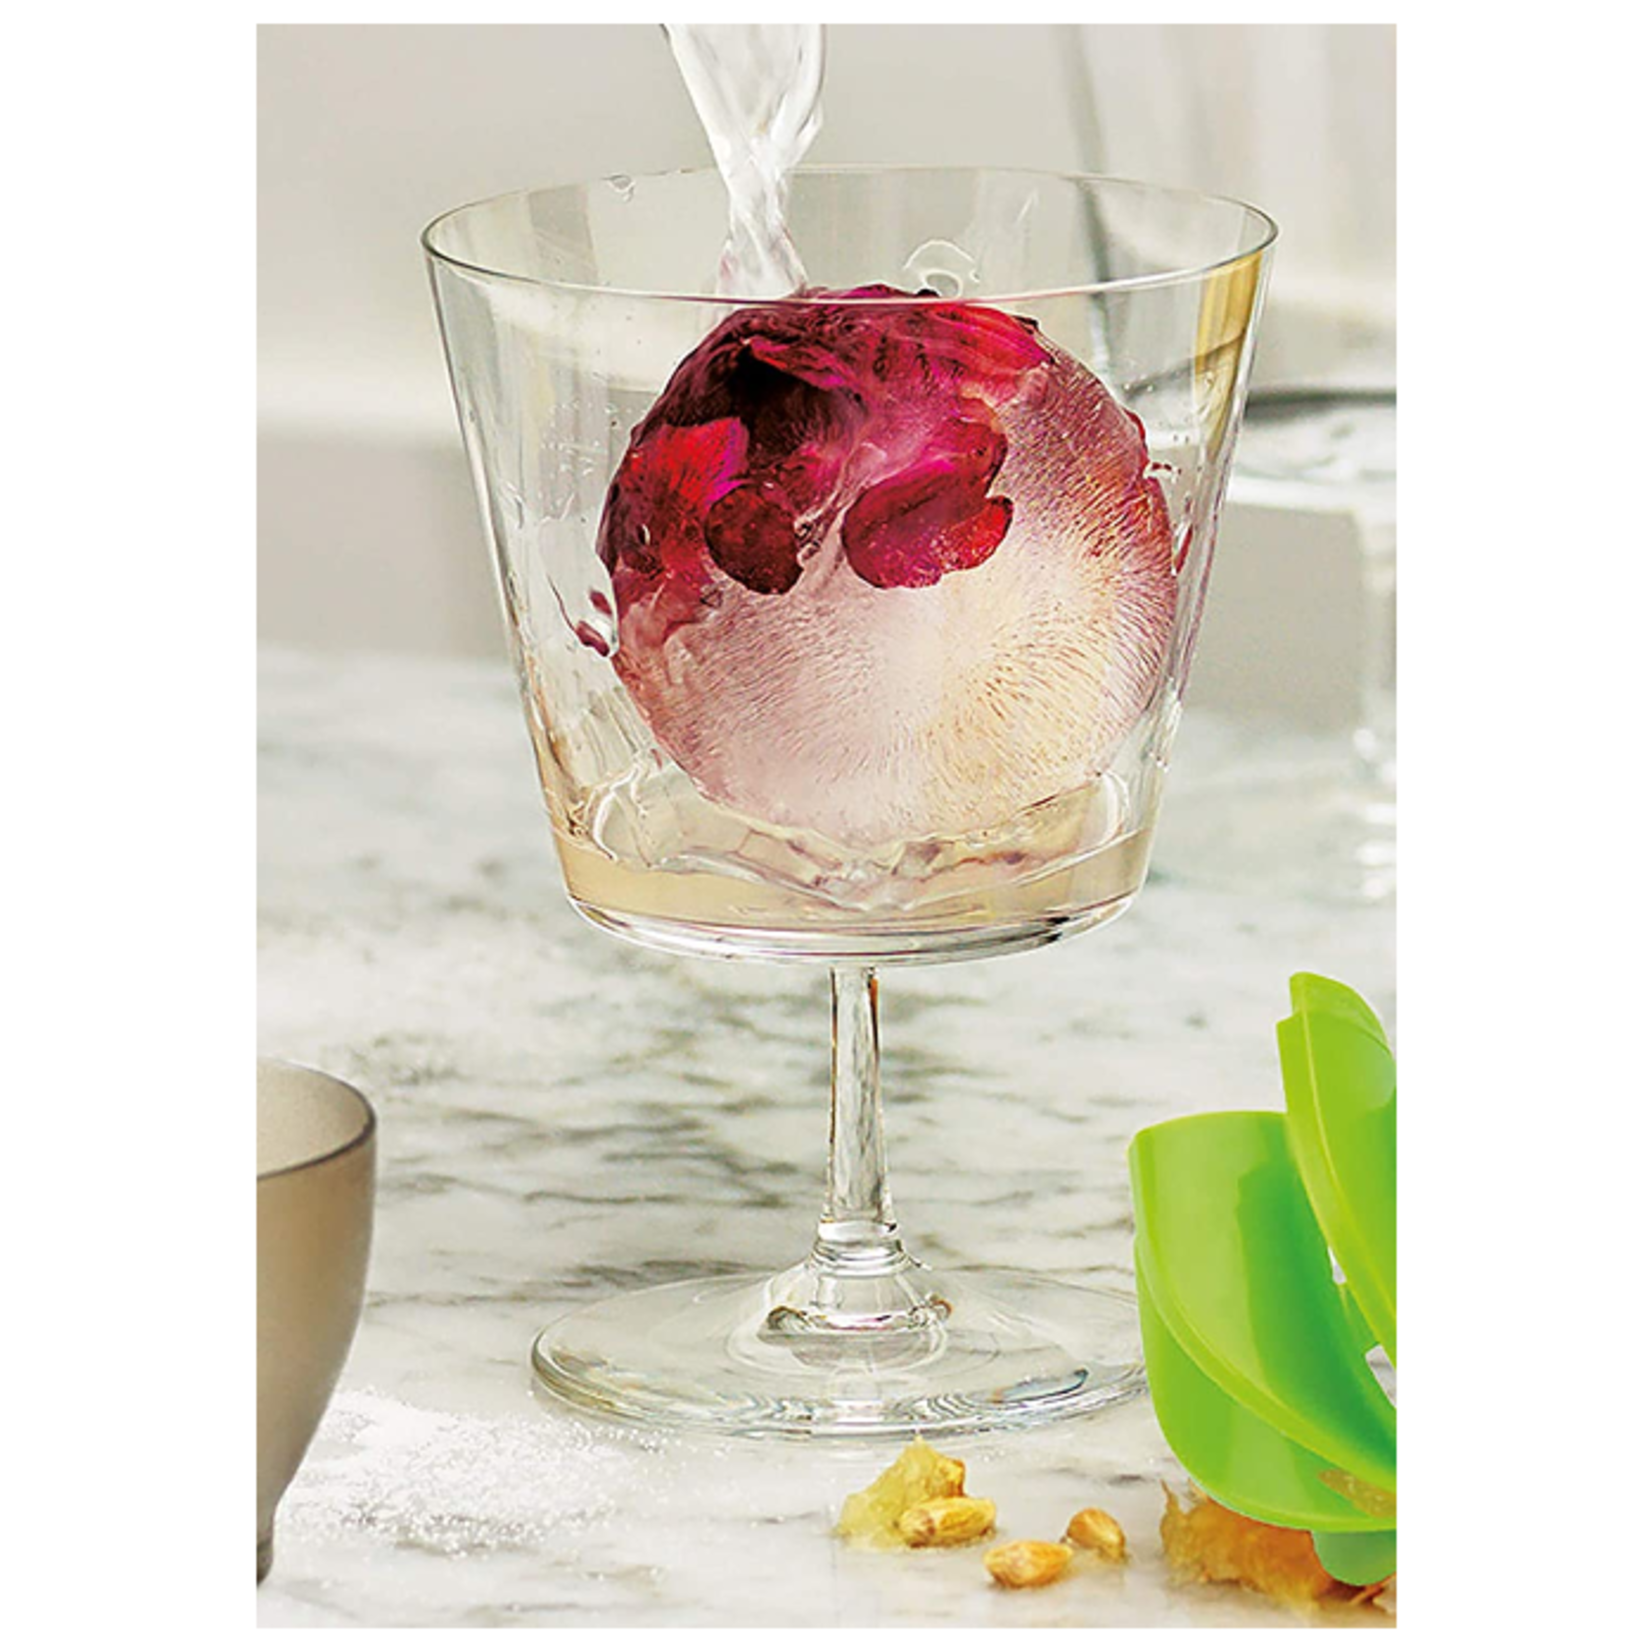  Tovolo Sphere Ice Molds - Set of 2: Ice Cube Molds